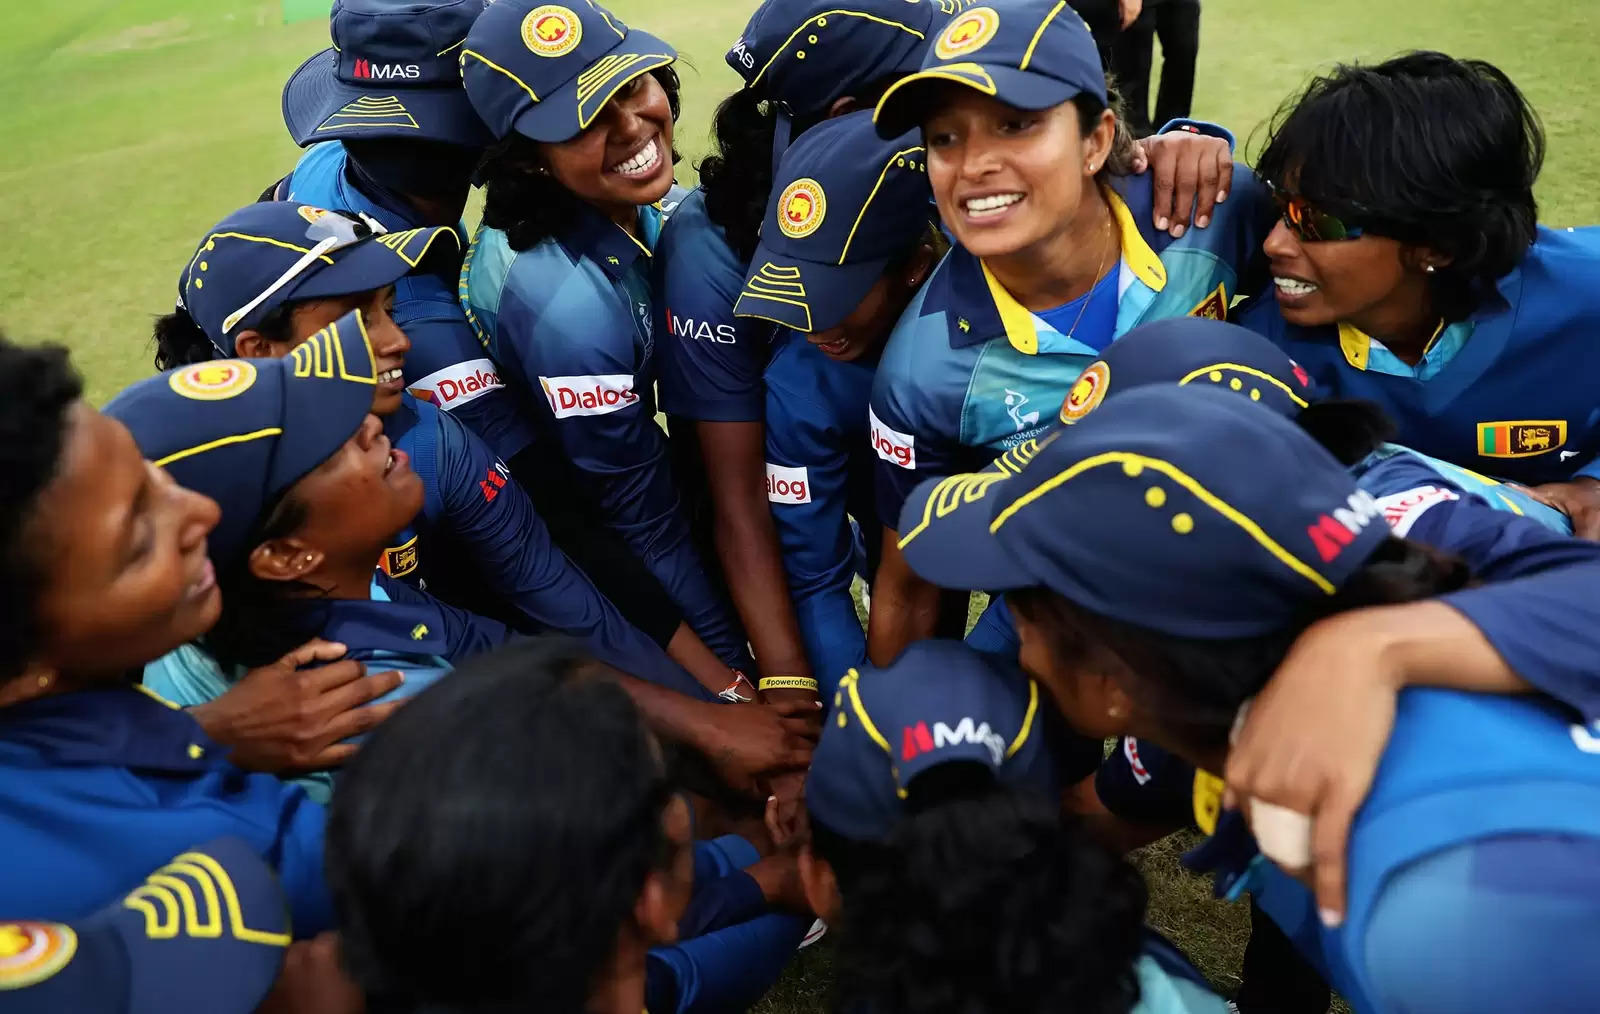 Sri Lanka Women’s Team Preview, Squad, Strengths, Weaknesses, Key Players and Fixtures for ICC Women’s T20 World Cup 2020